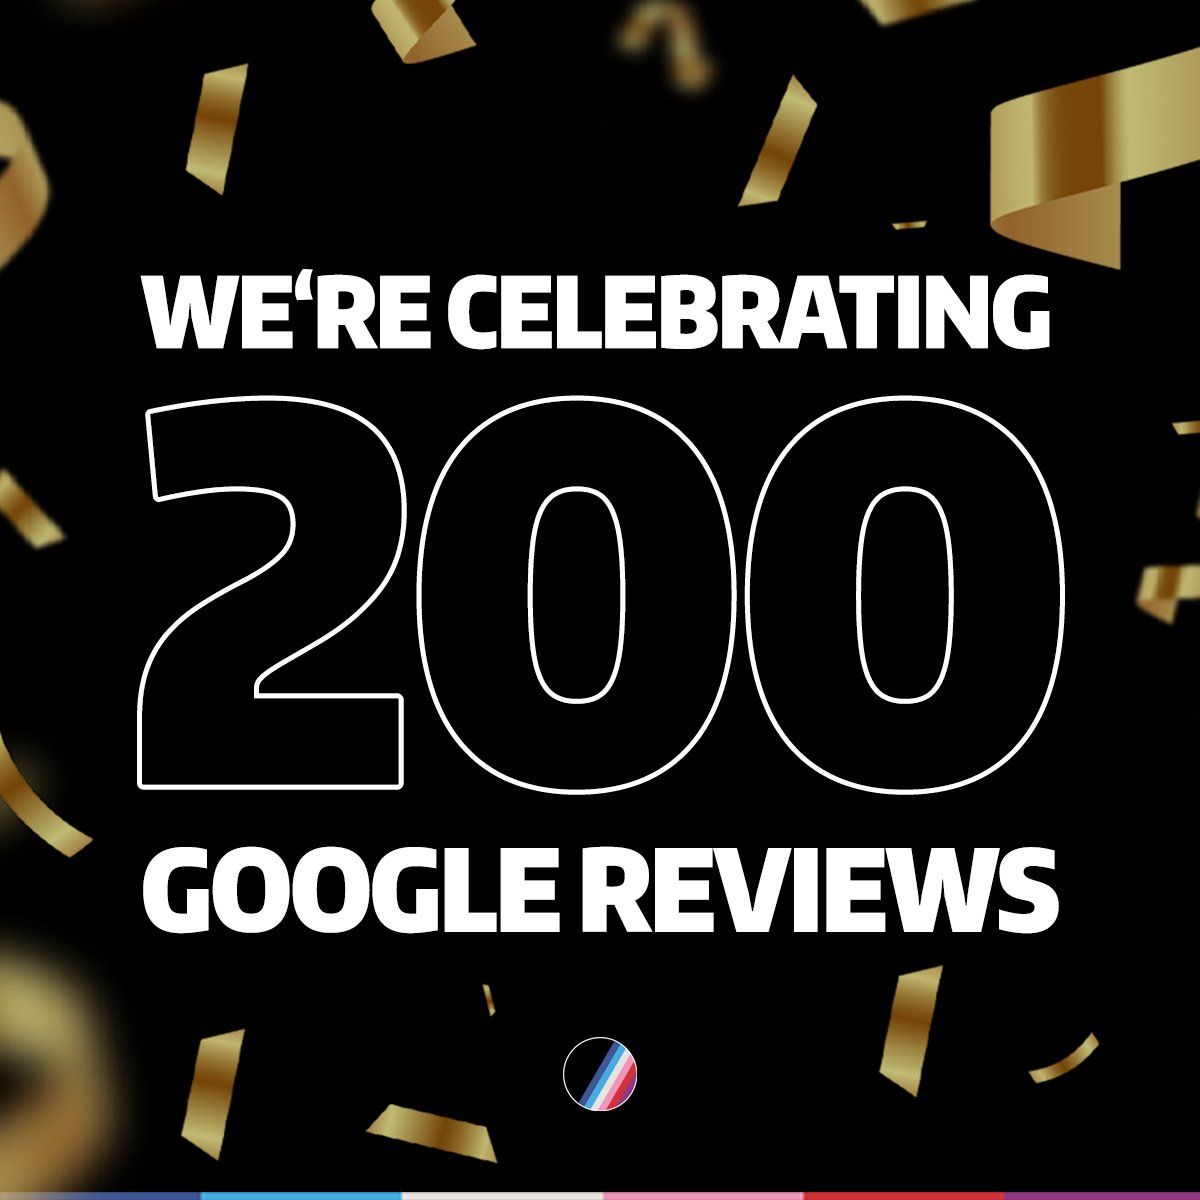 🌟🥂 We've hit a milestone worth celebrating - 200 Google reviews and counting! 🌟🤩 Thank you for making us your trusted choice. With an average rating of 4.7 stars, your support fuels our commitment to excellence! 🚗💫 #200ReviewsStrong #Grateful #DrivingExcellence 🌟🚗